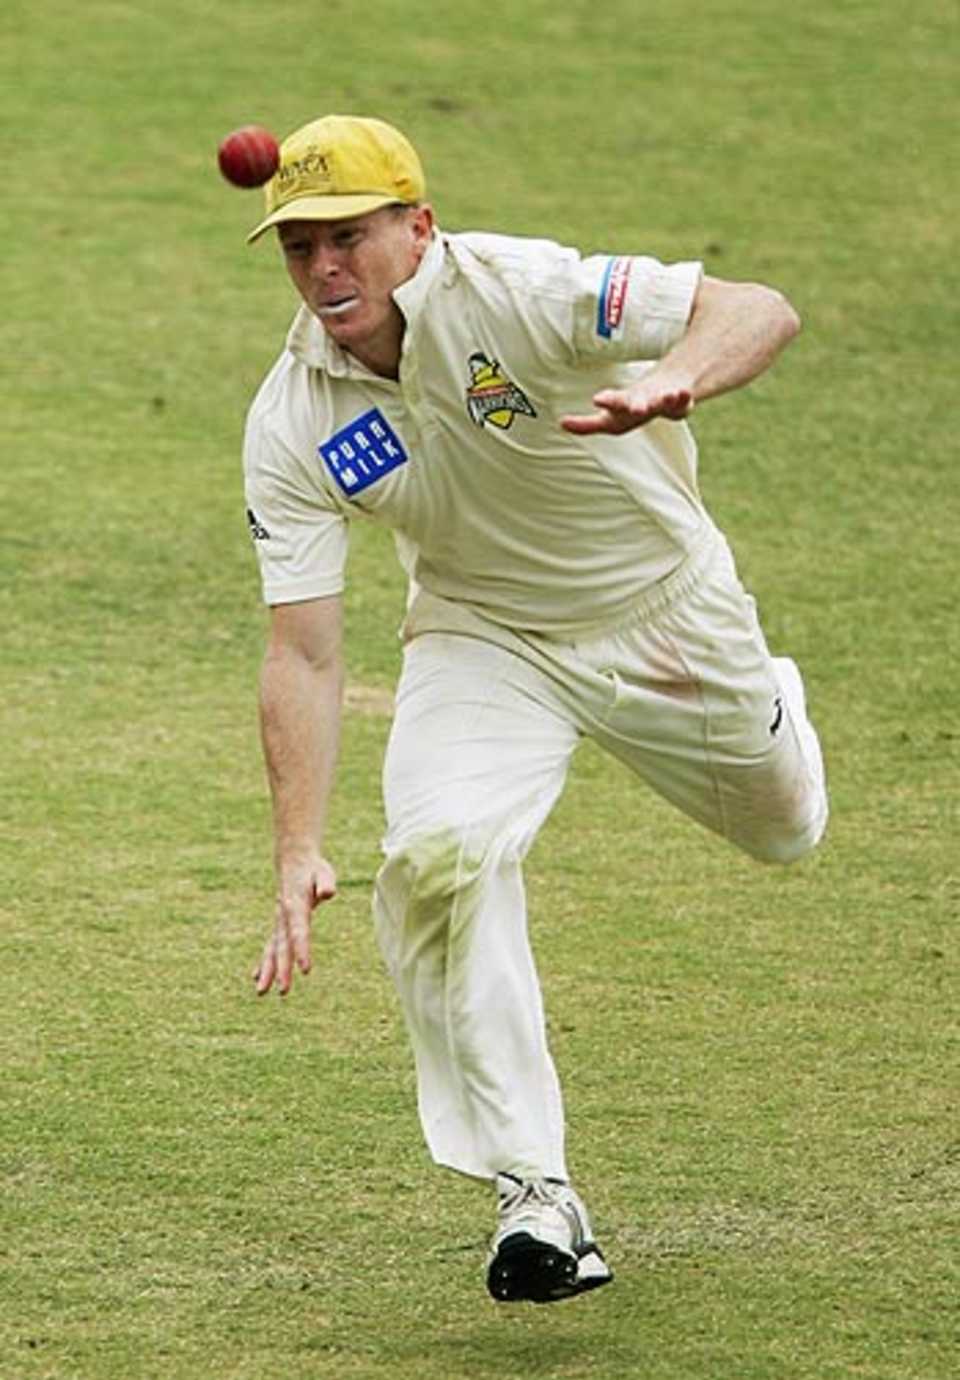 Chris Rogers fields during Western Australia's game against Victoria, Western Australia v Victoria, Perth, October 21, 2005